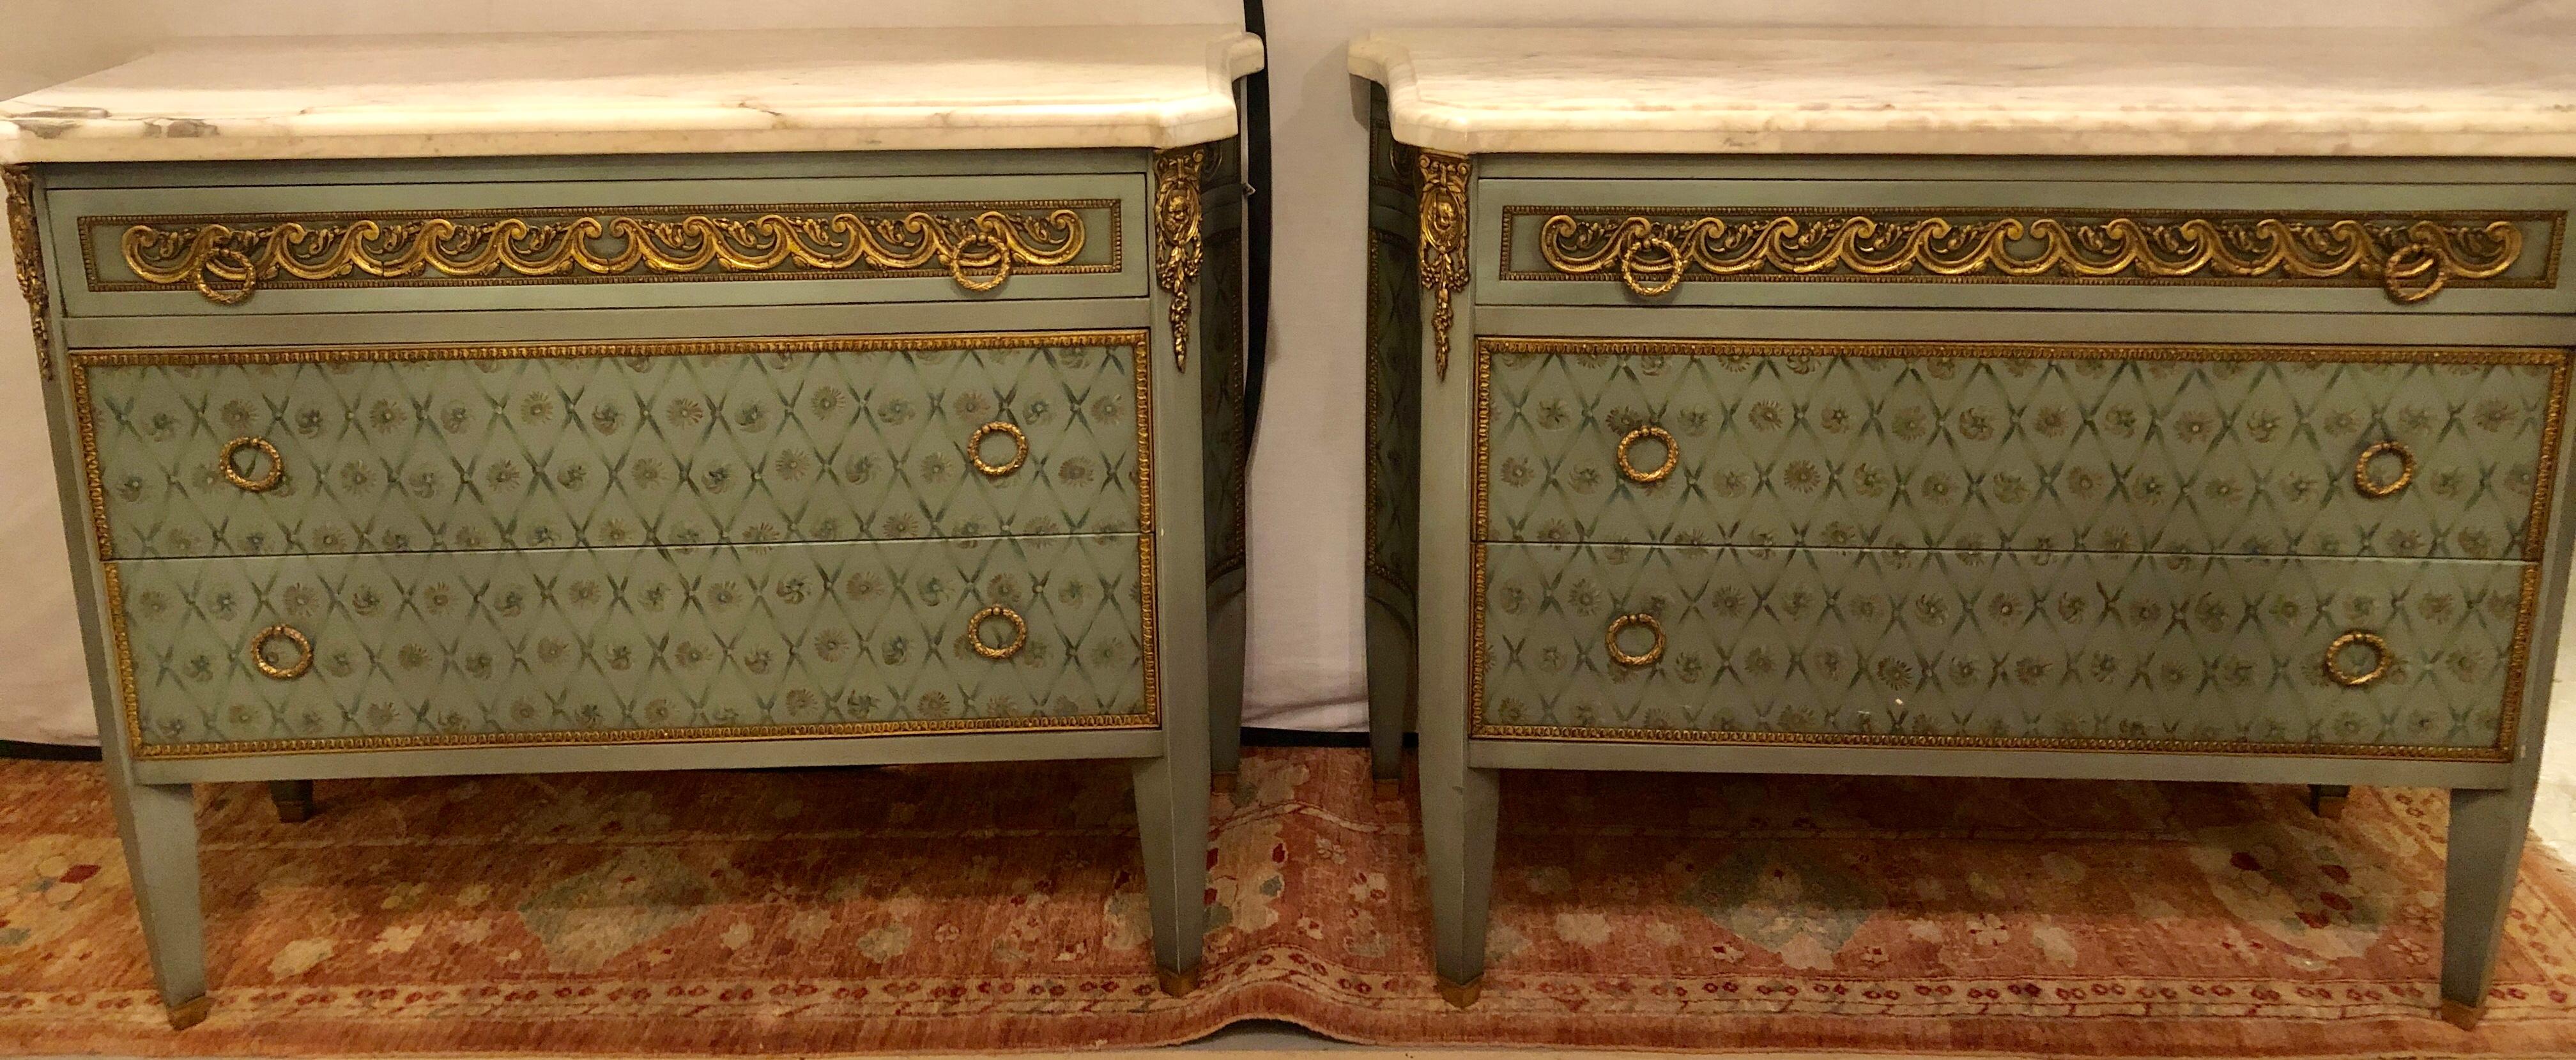 Hollywood Regency Marble-Top Commodes Chests Commode Nightstands Pair 15